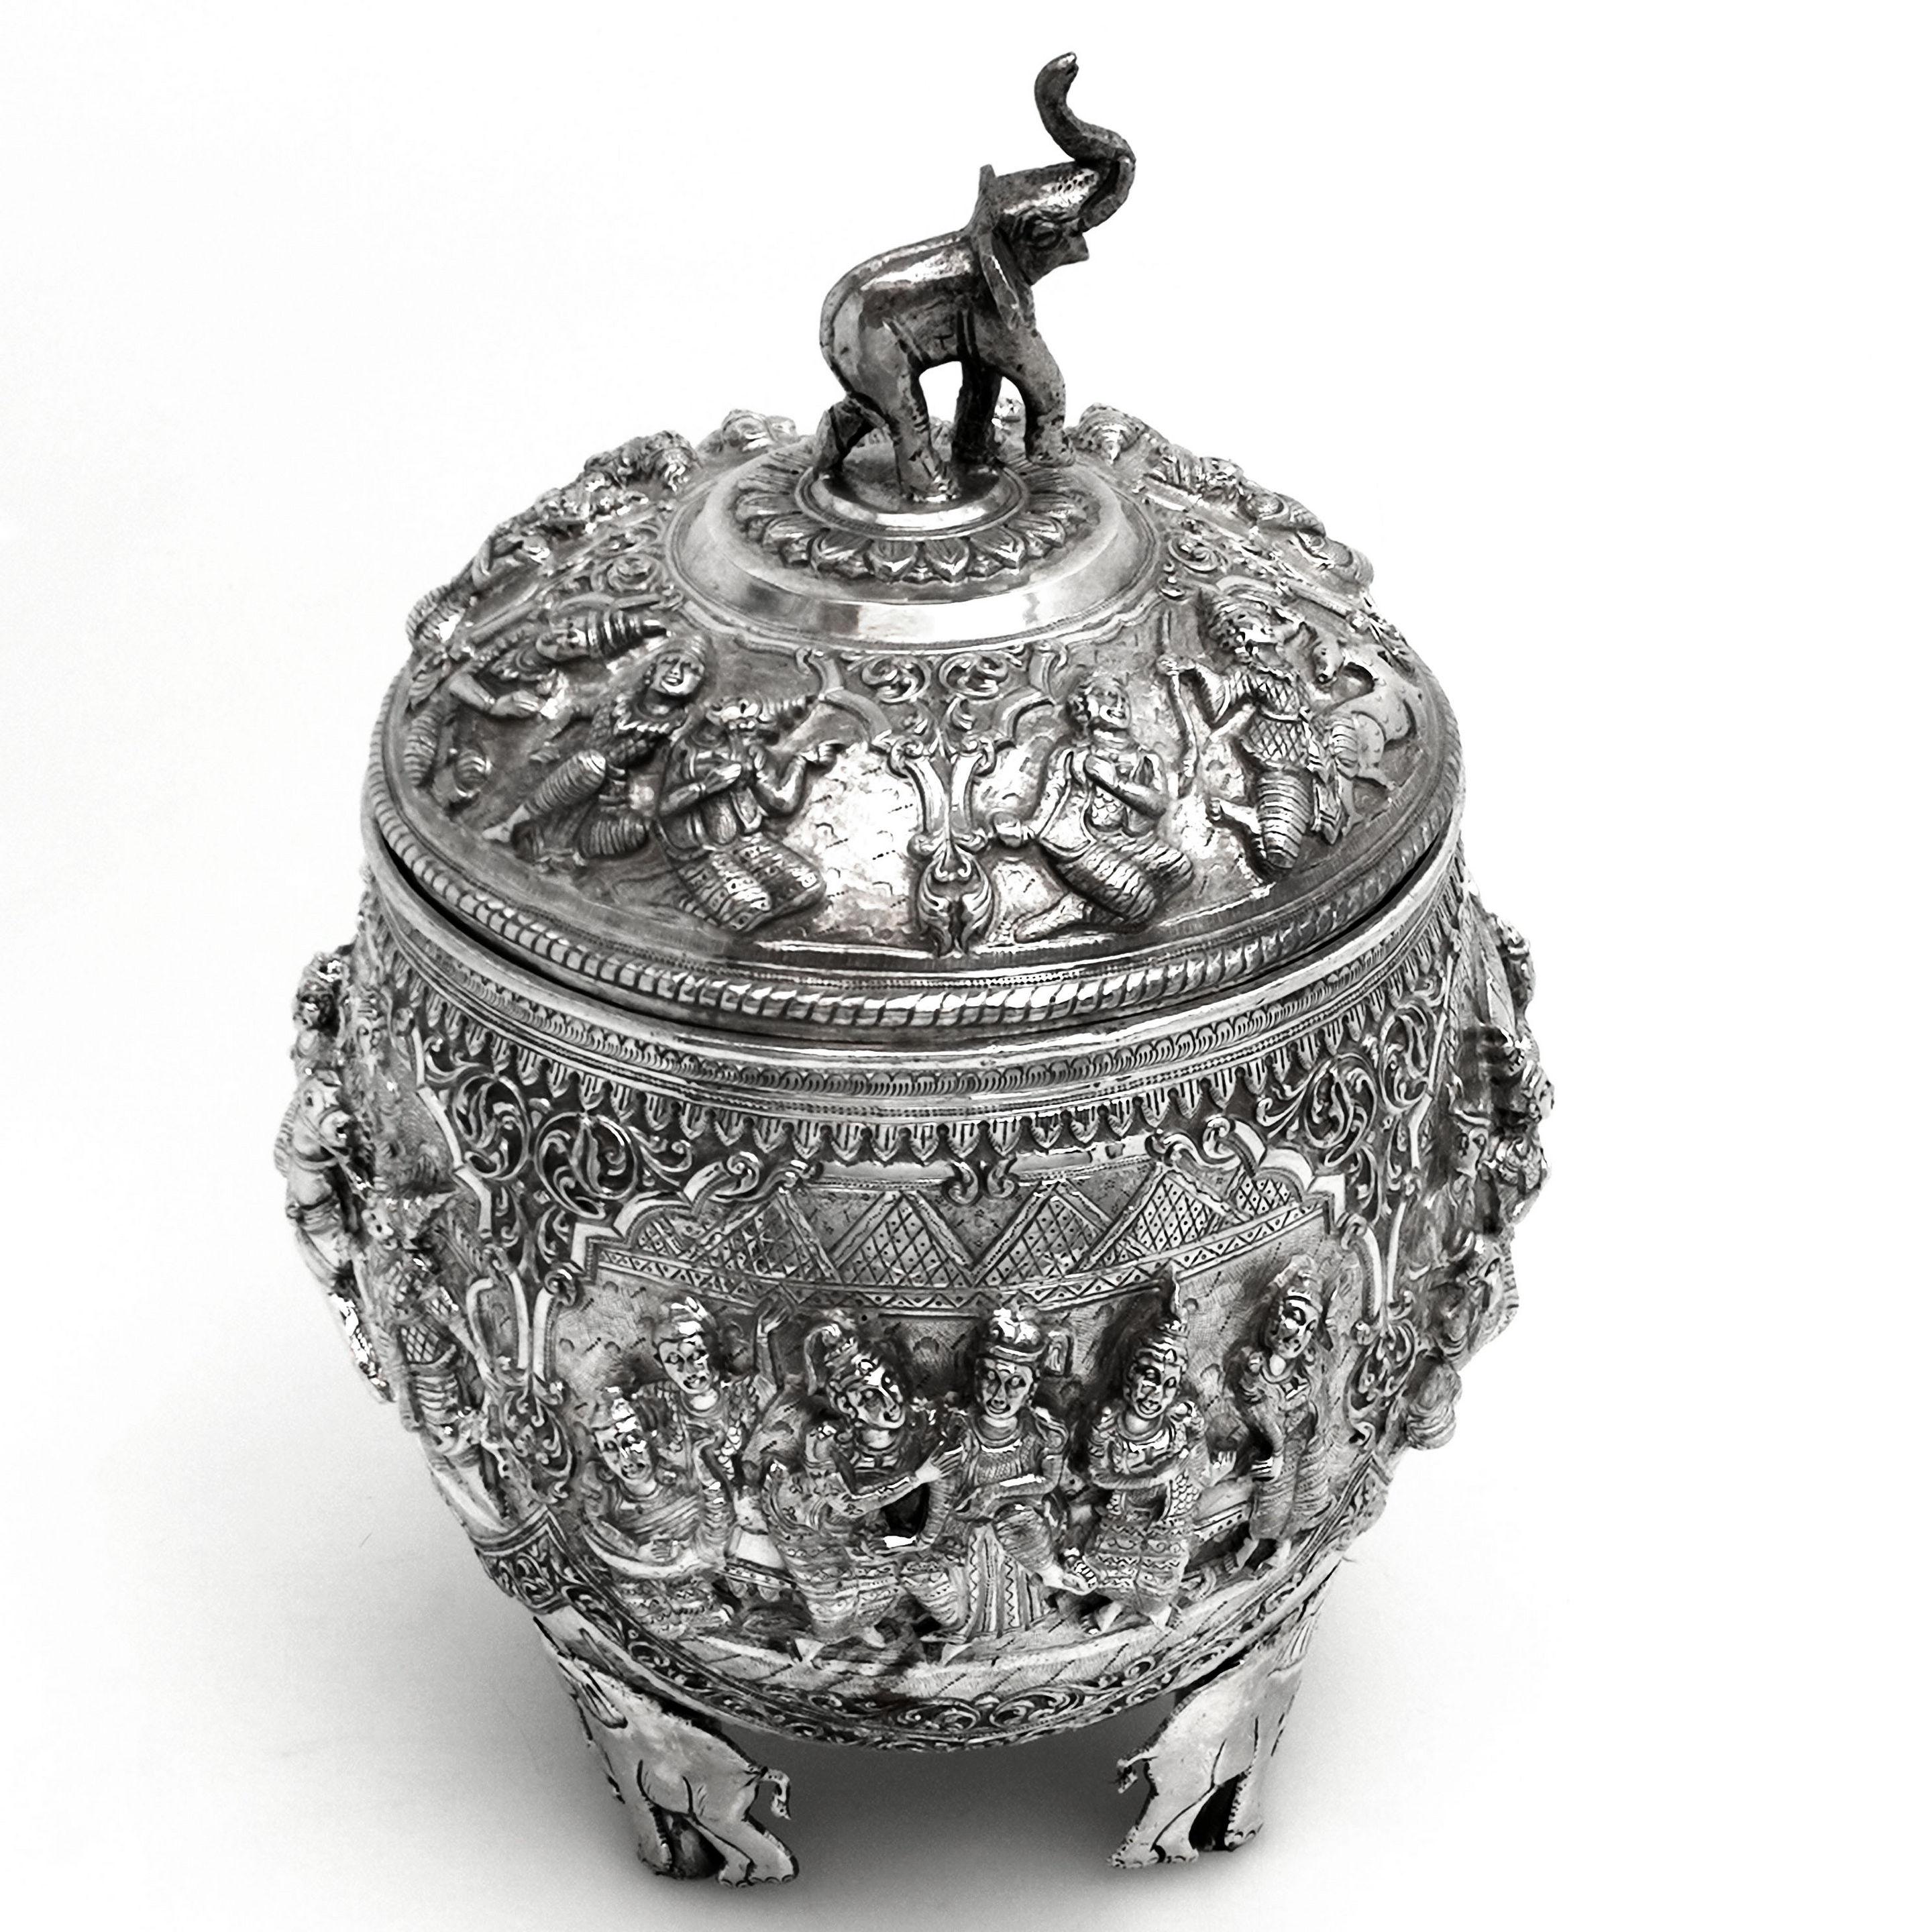 A magnificent Antique Burmese silver covered Bowl with a tightly fitted push lid. The entire exterior of the Box is covered with ornate chased scenes in deep relief. These Images are created in the traditional antique Burmese style and show images